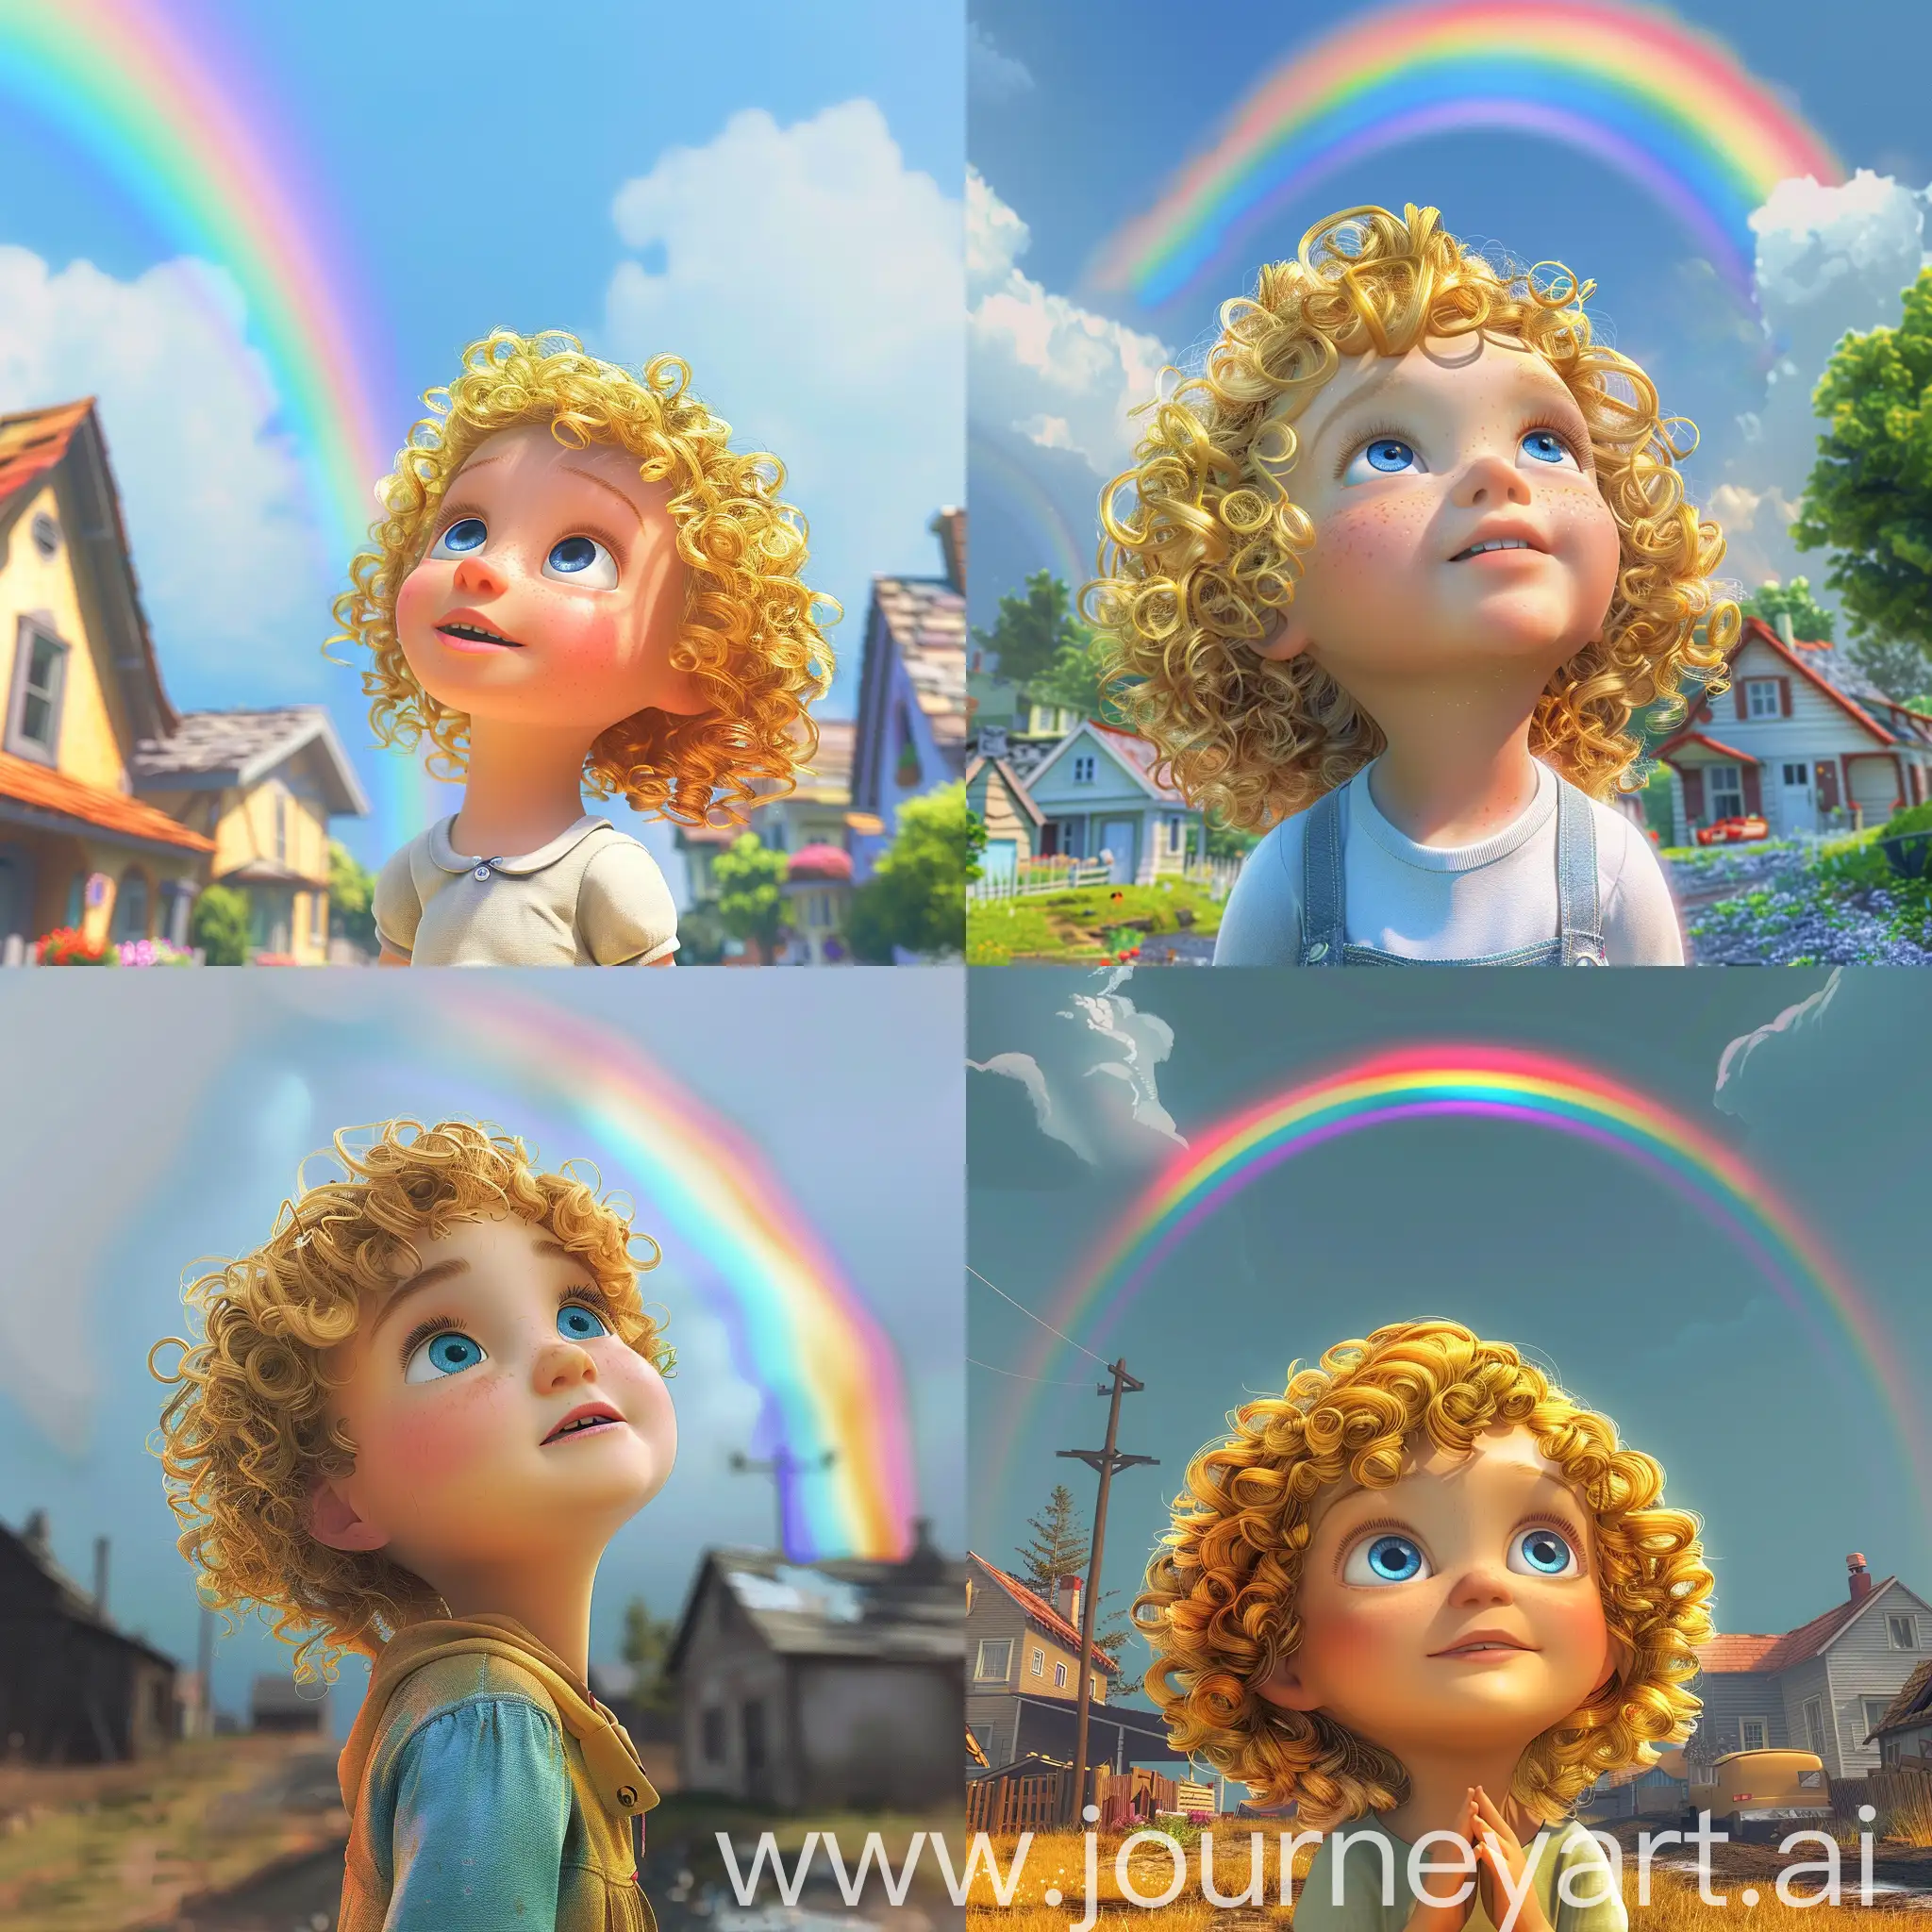 Golden-CurlyHaired-Girl-Admiring-Rainbow-in-PixarStyle-Small-Town-Scene